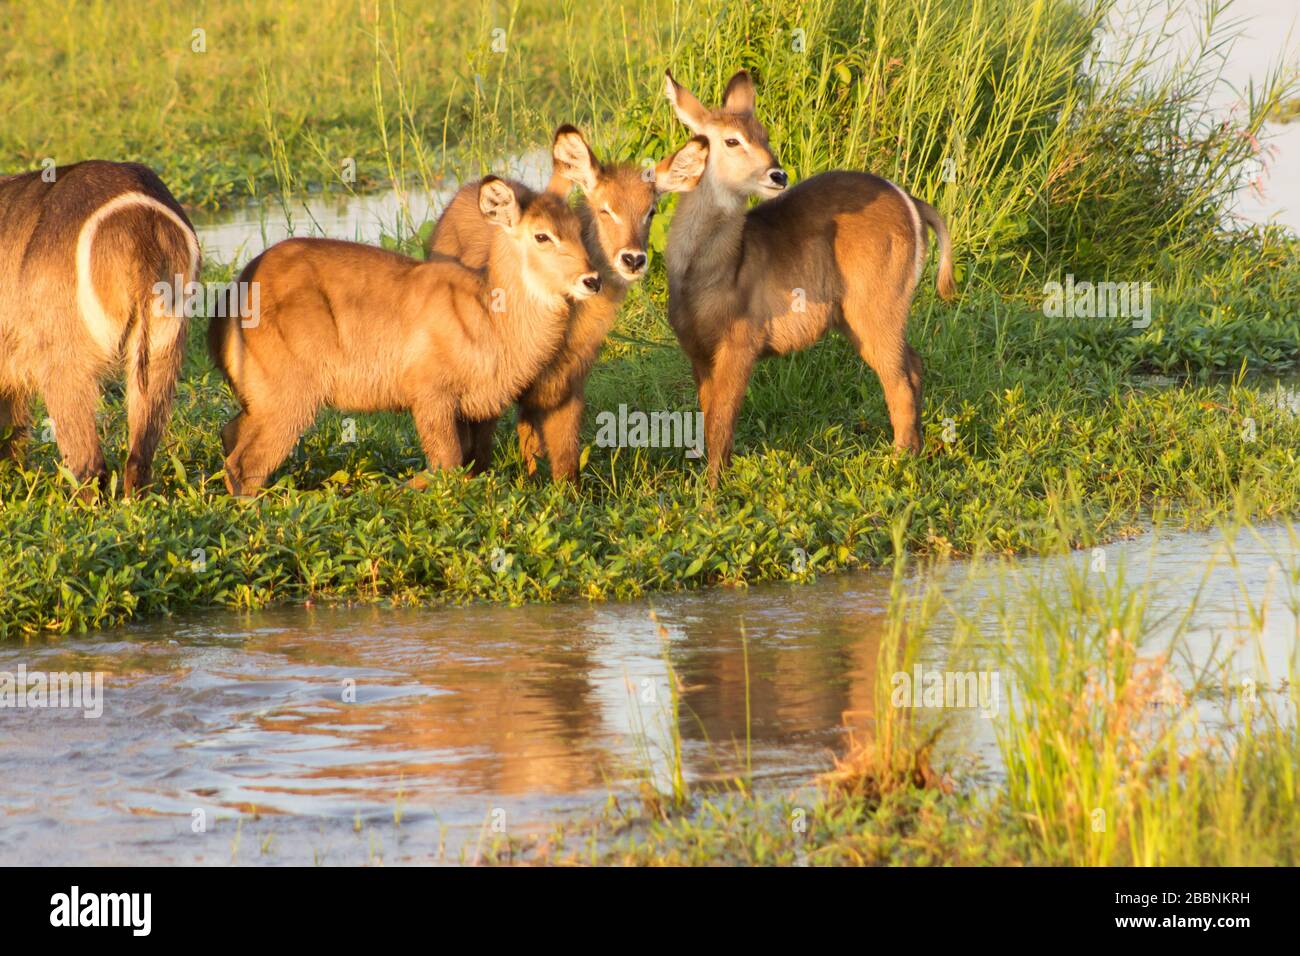 A group of Waterbuck calves (Kobus ellipsiprymnus) standing closely together on an sandbank in the Olifants River in the Kruger National Park Stock Photo